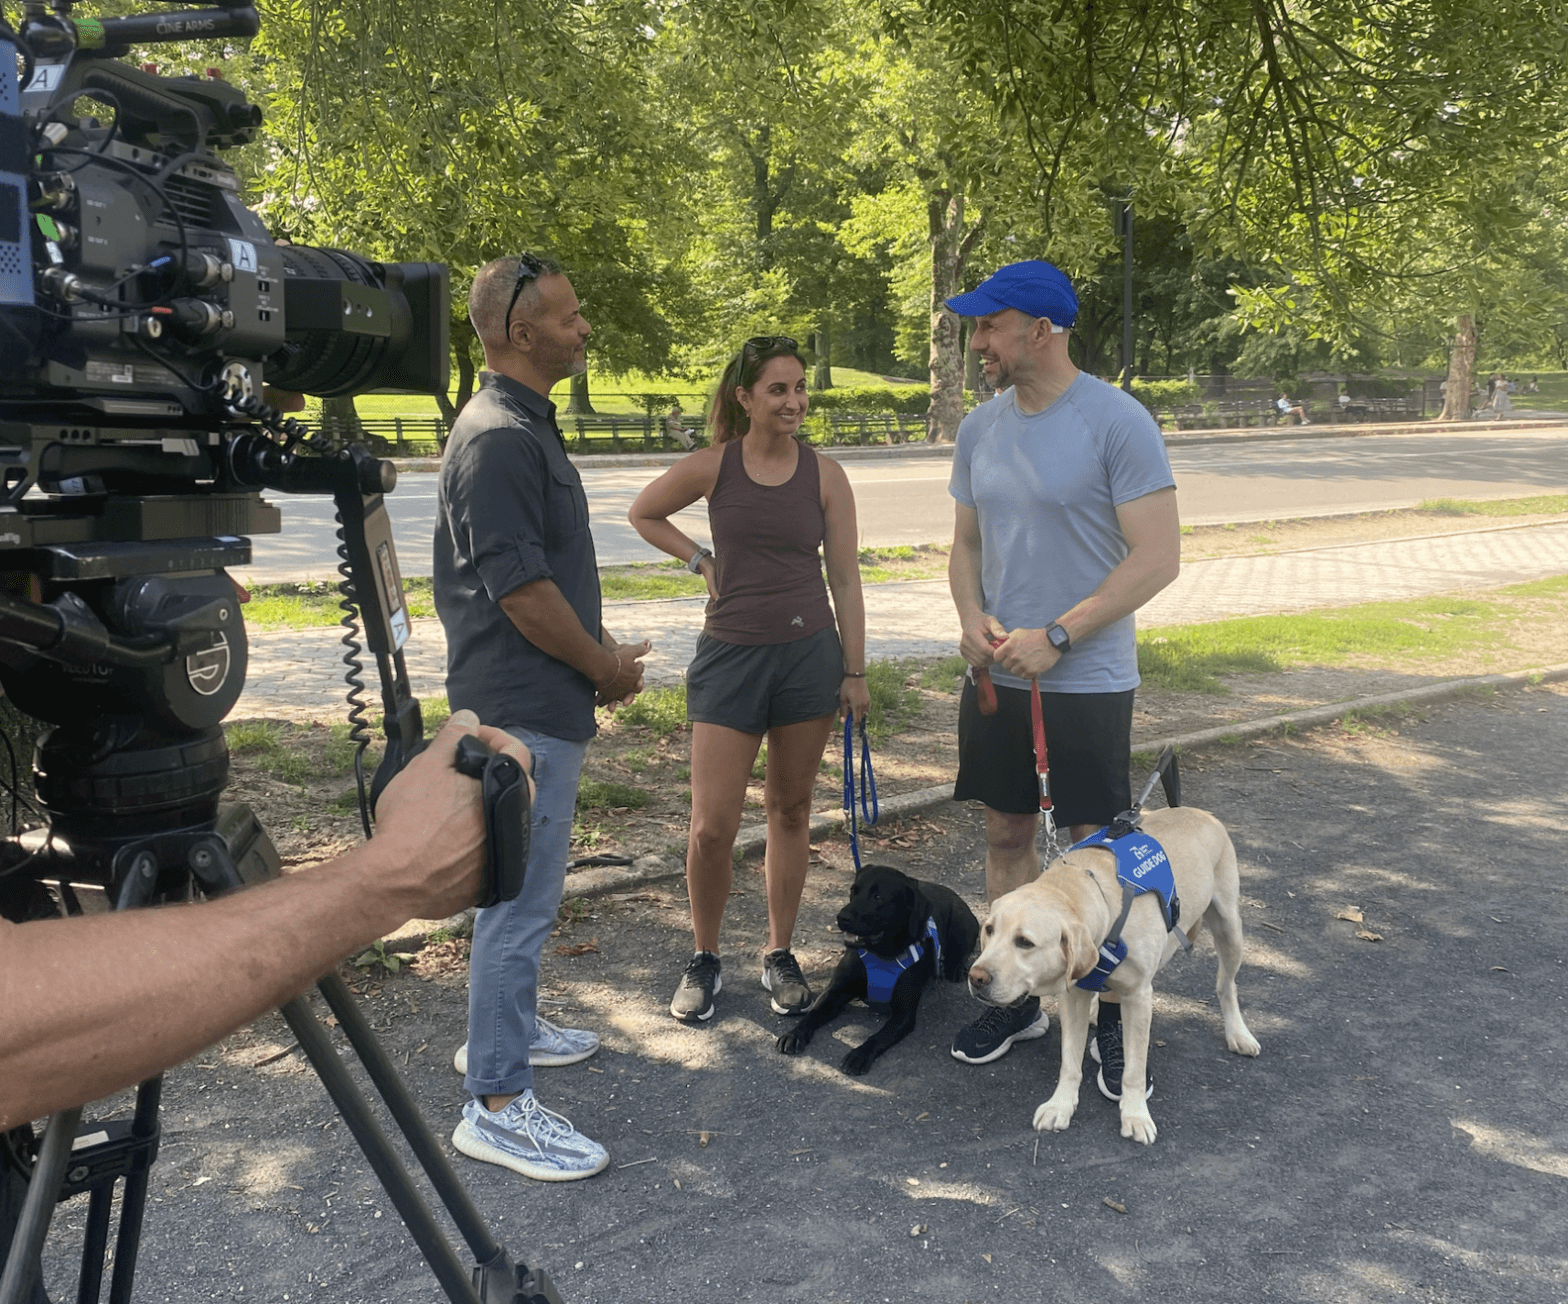 Interviewer David stands in the park with Peyden, Thomas and two guide dogs